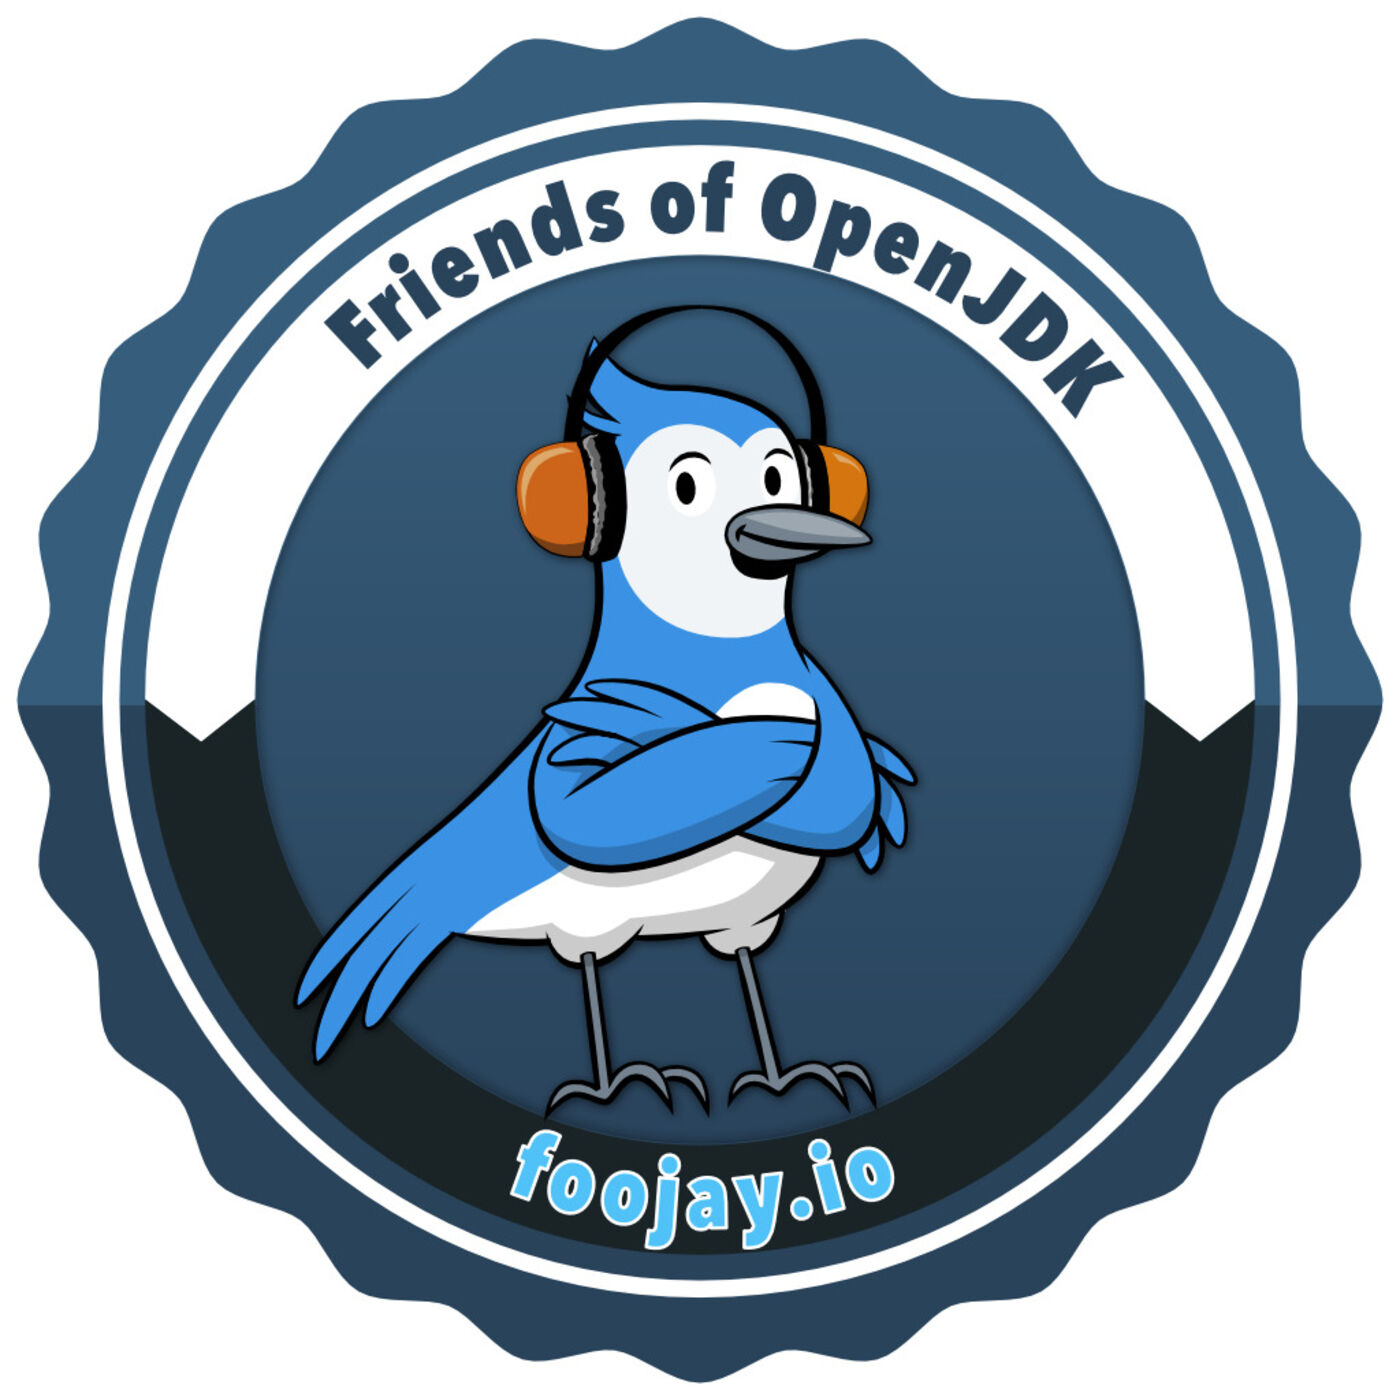 Foojay.io, the Friends Of OpenJDK!